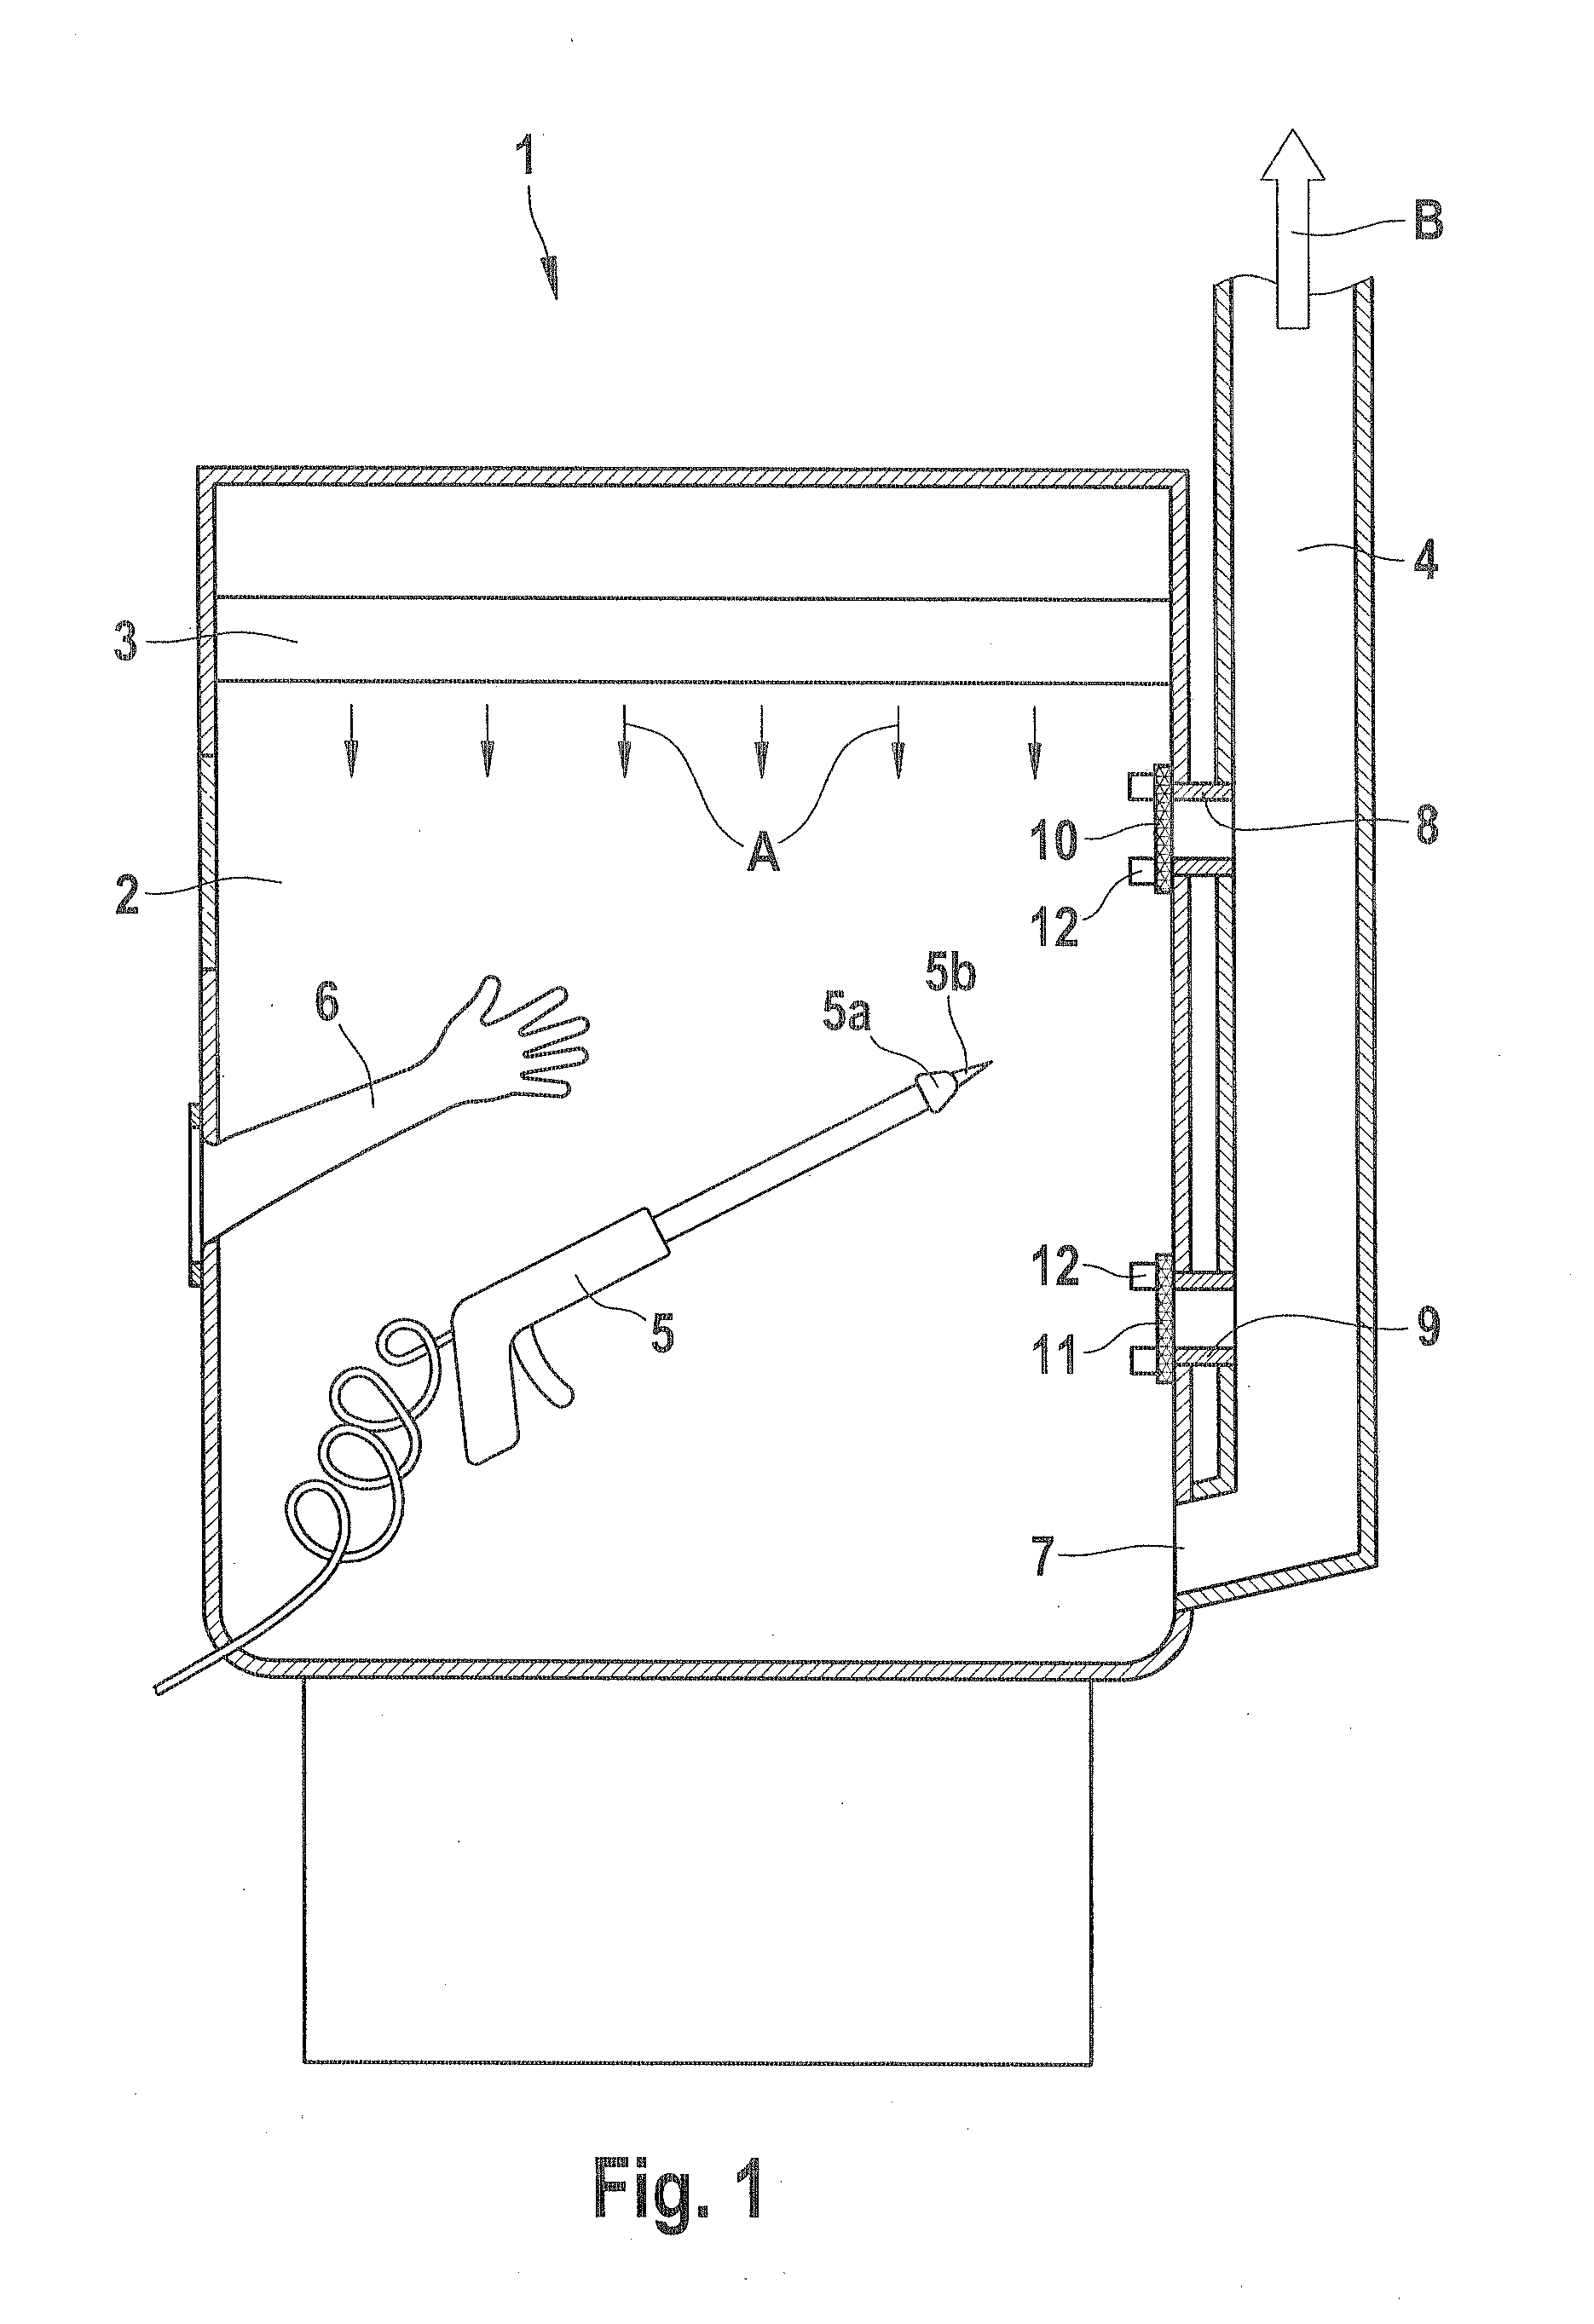 Apparatus having a closed-off work chamber with improved cleanability